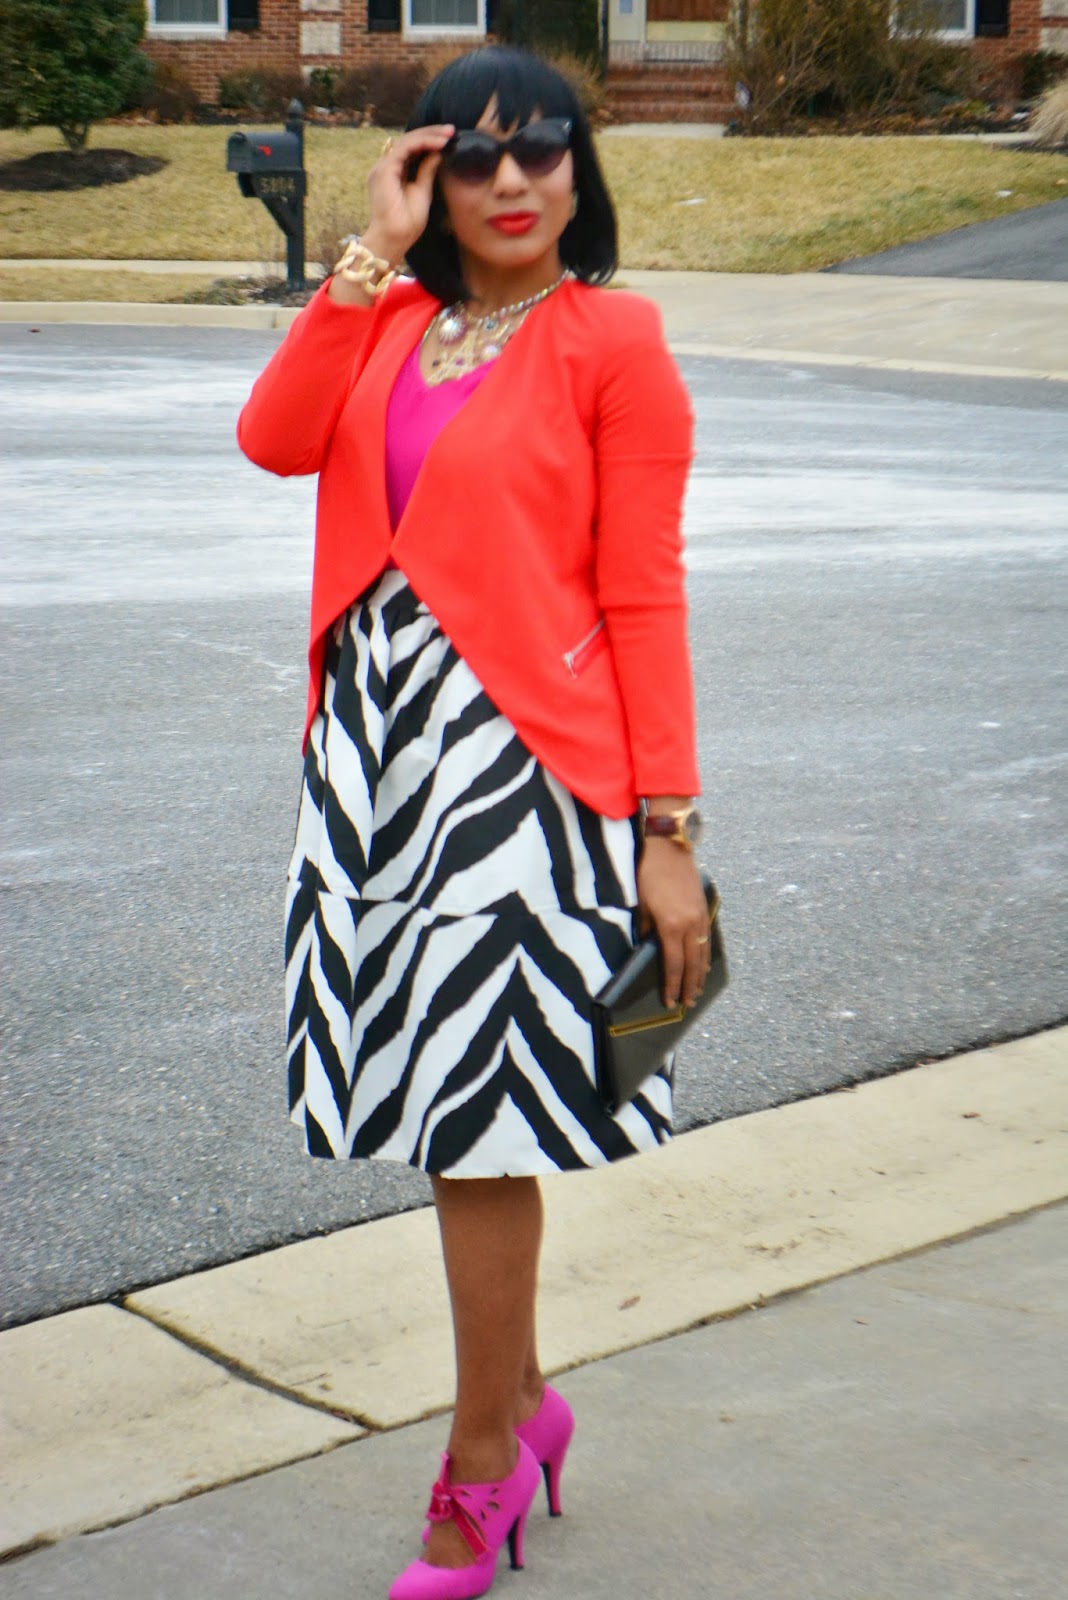 Milly styles : Zebra Spring Colors